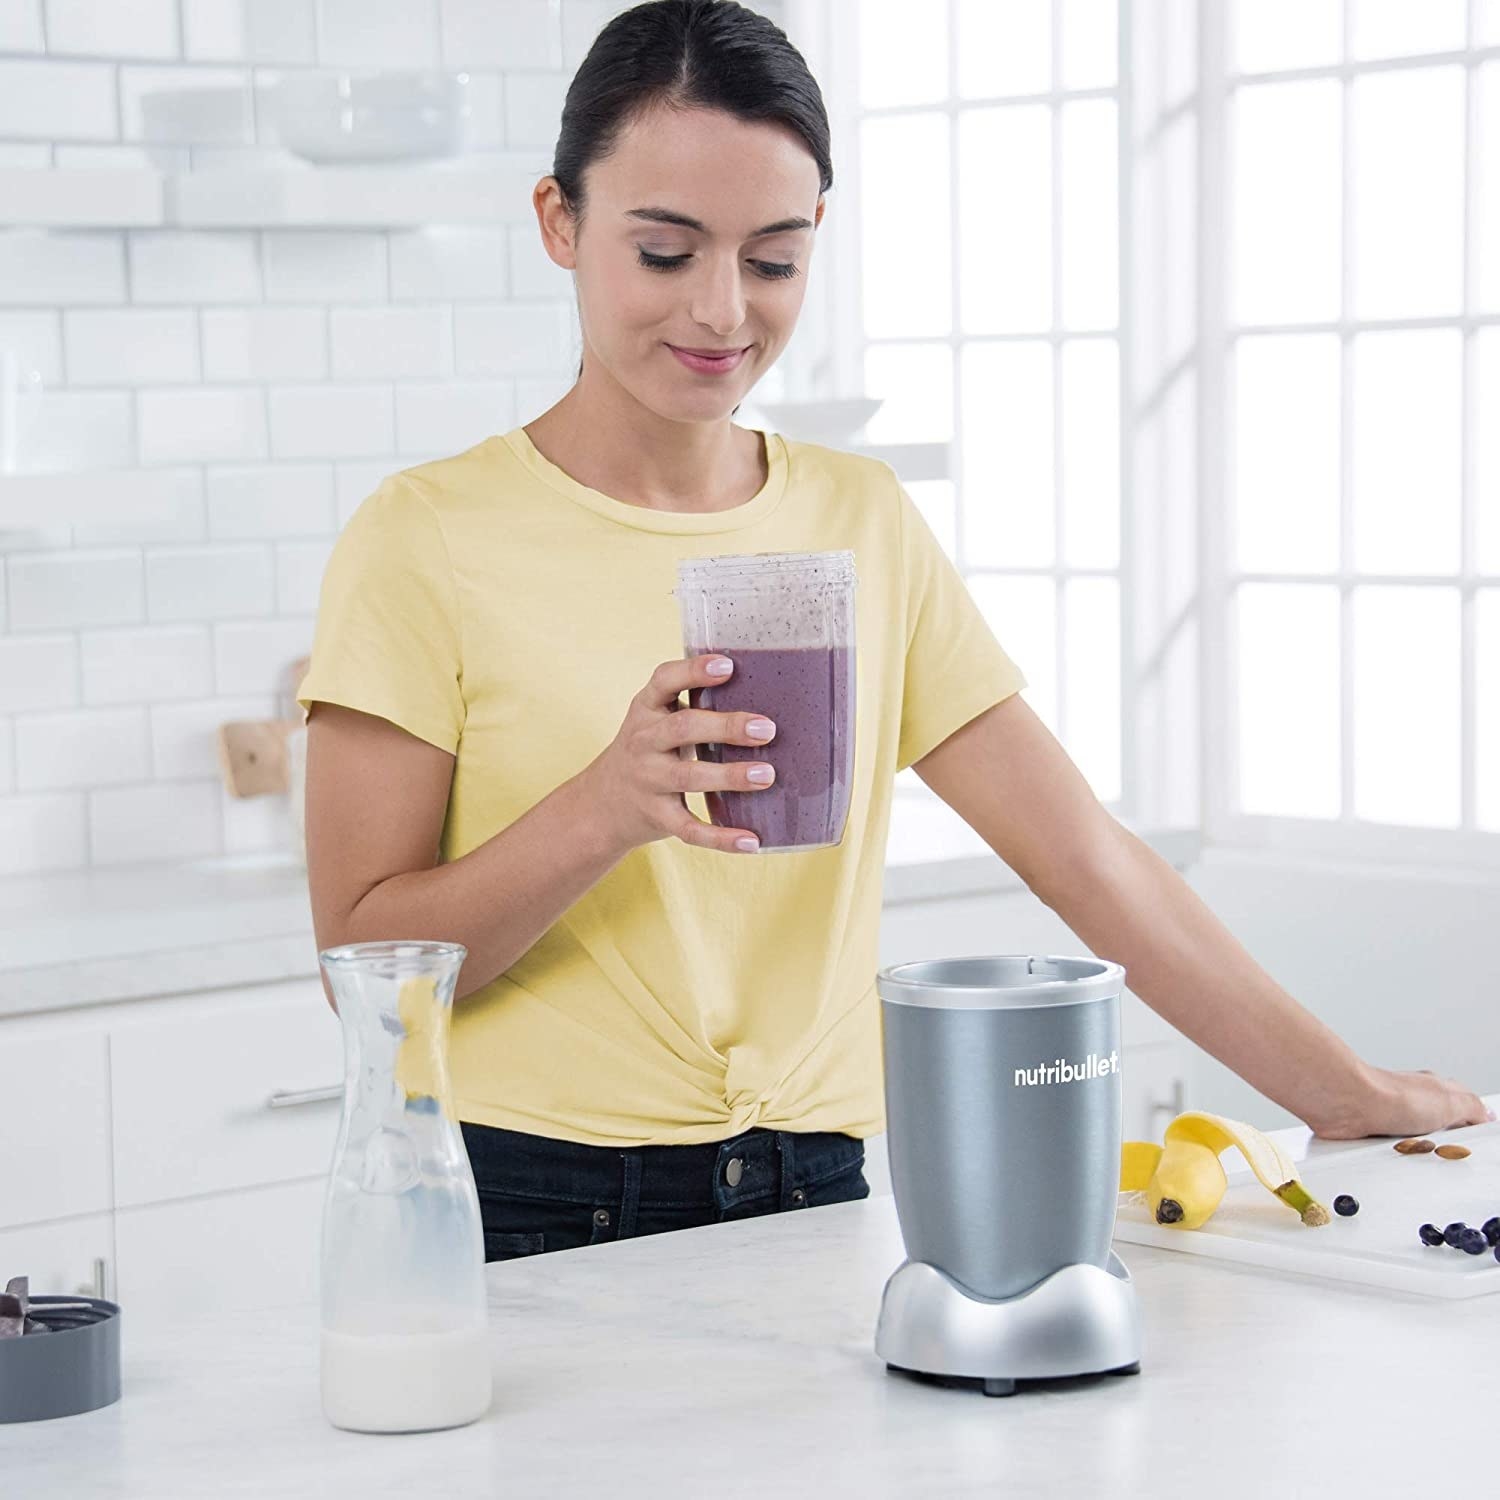 A woman holding a smoothie that she just made using the Nutribullet